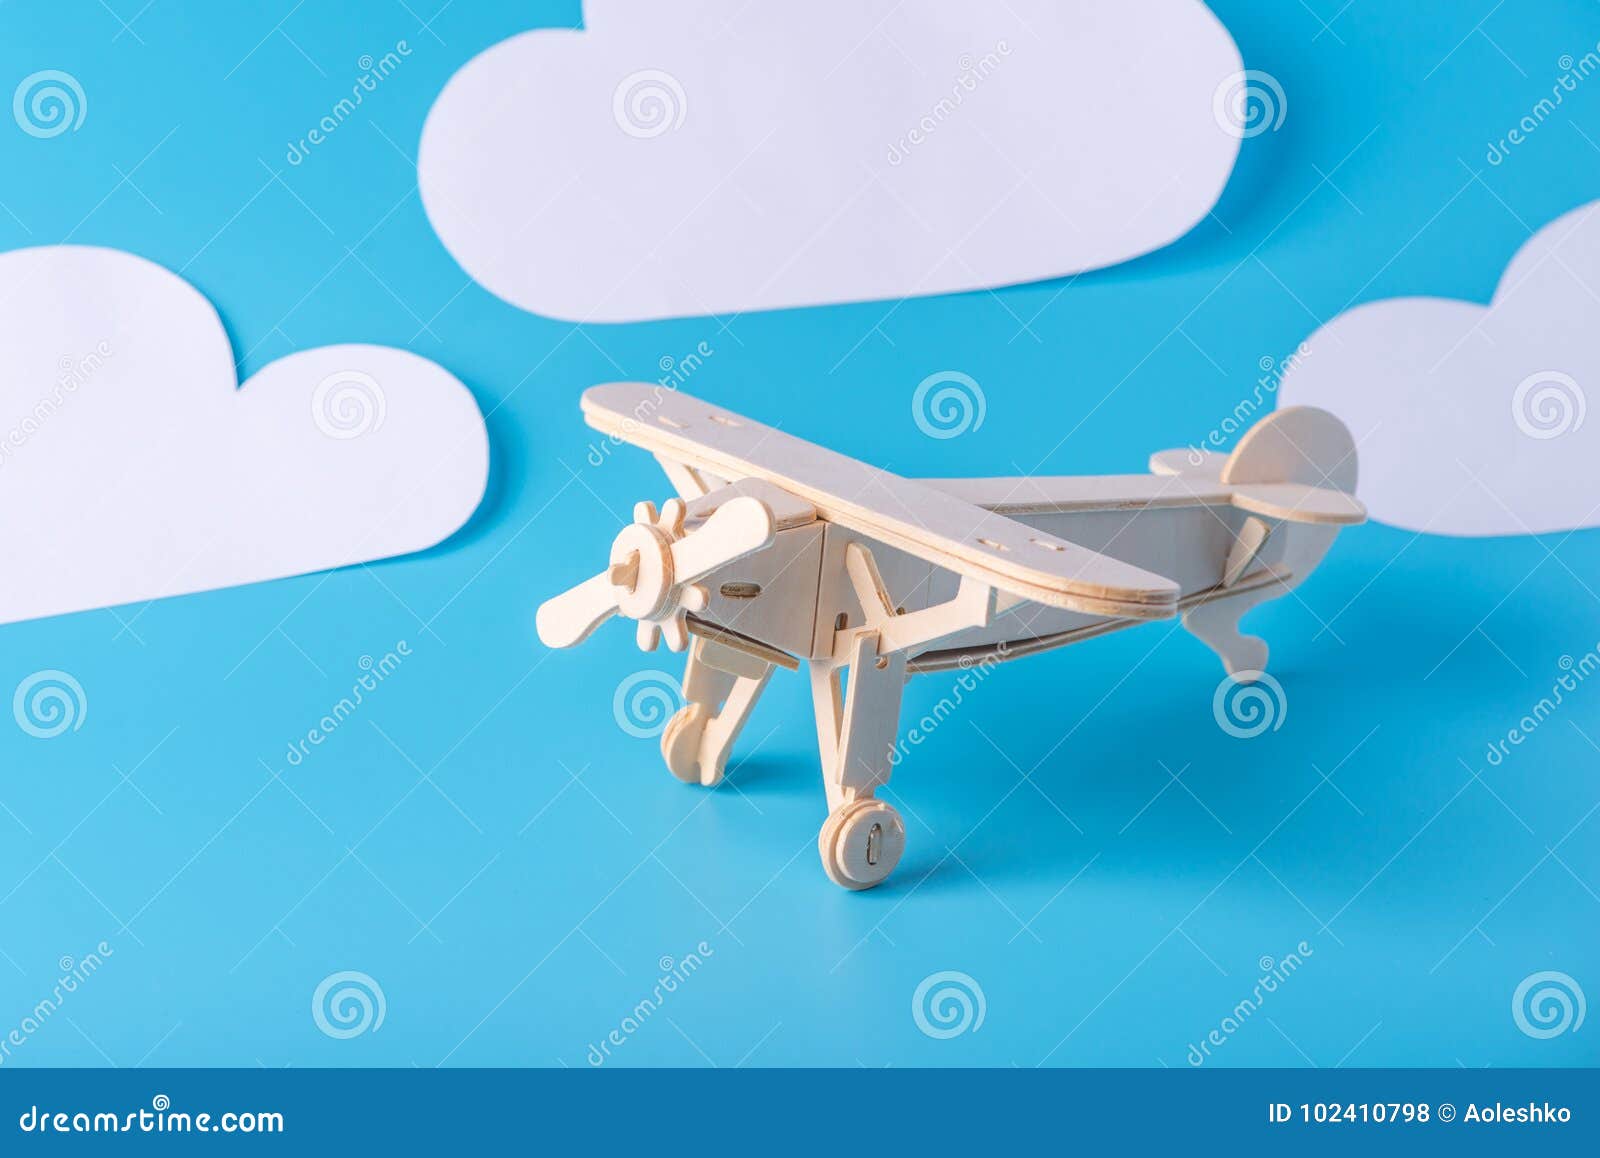 Wooden Toy Airplane on a Background of Blue Sky with Paper Clouds ...